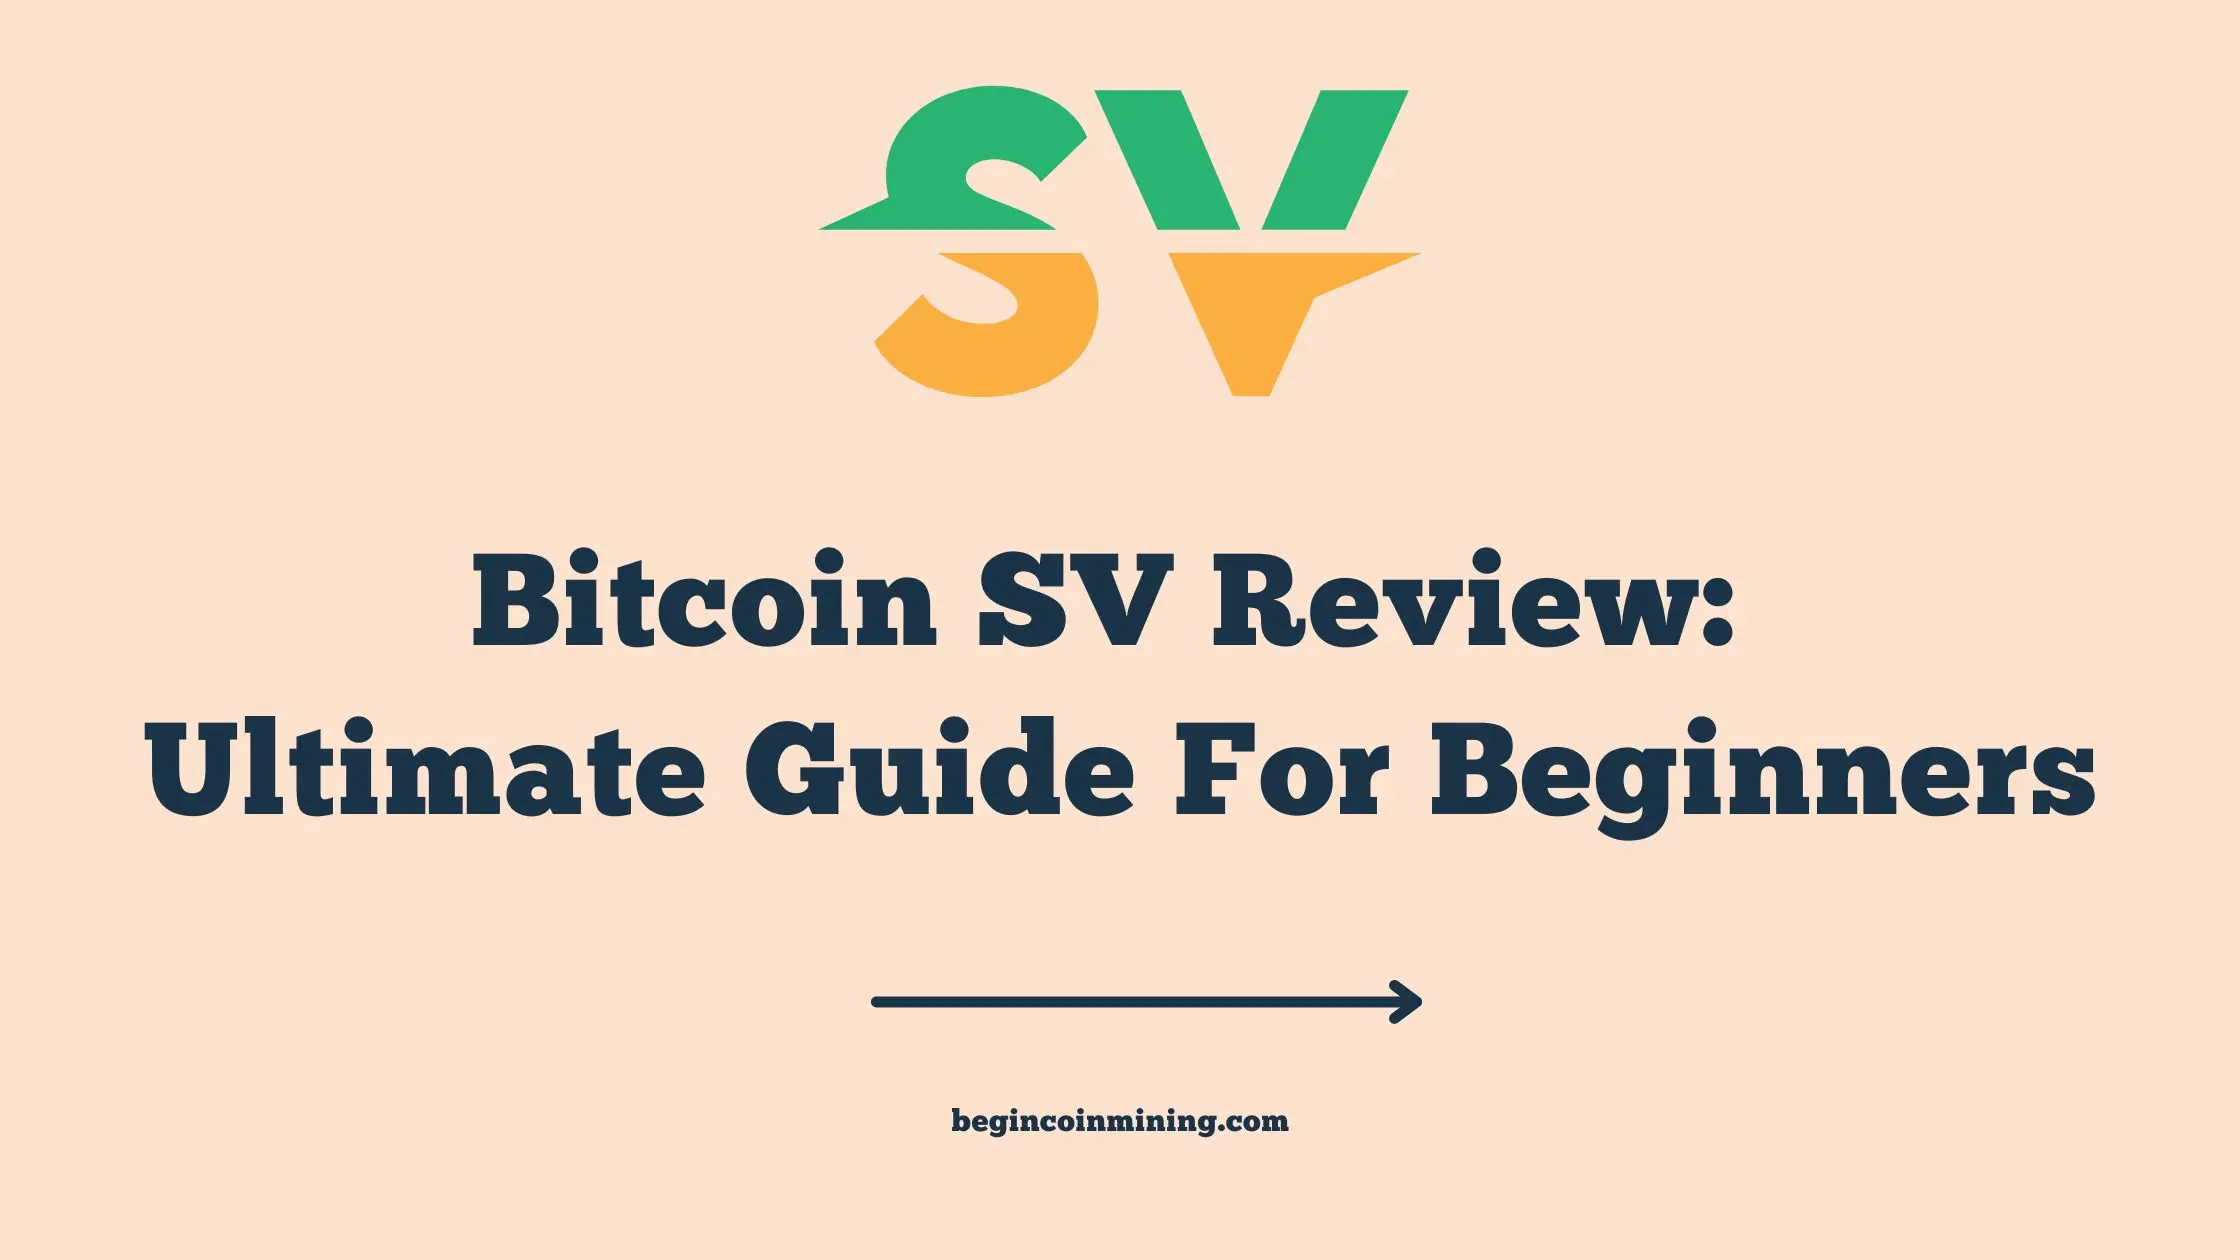 Bitcoin SV Review Ultimate Guide For Beginners